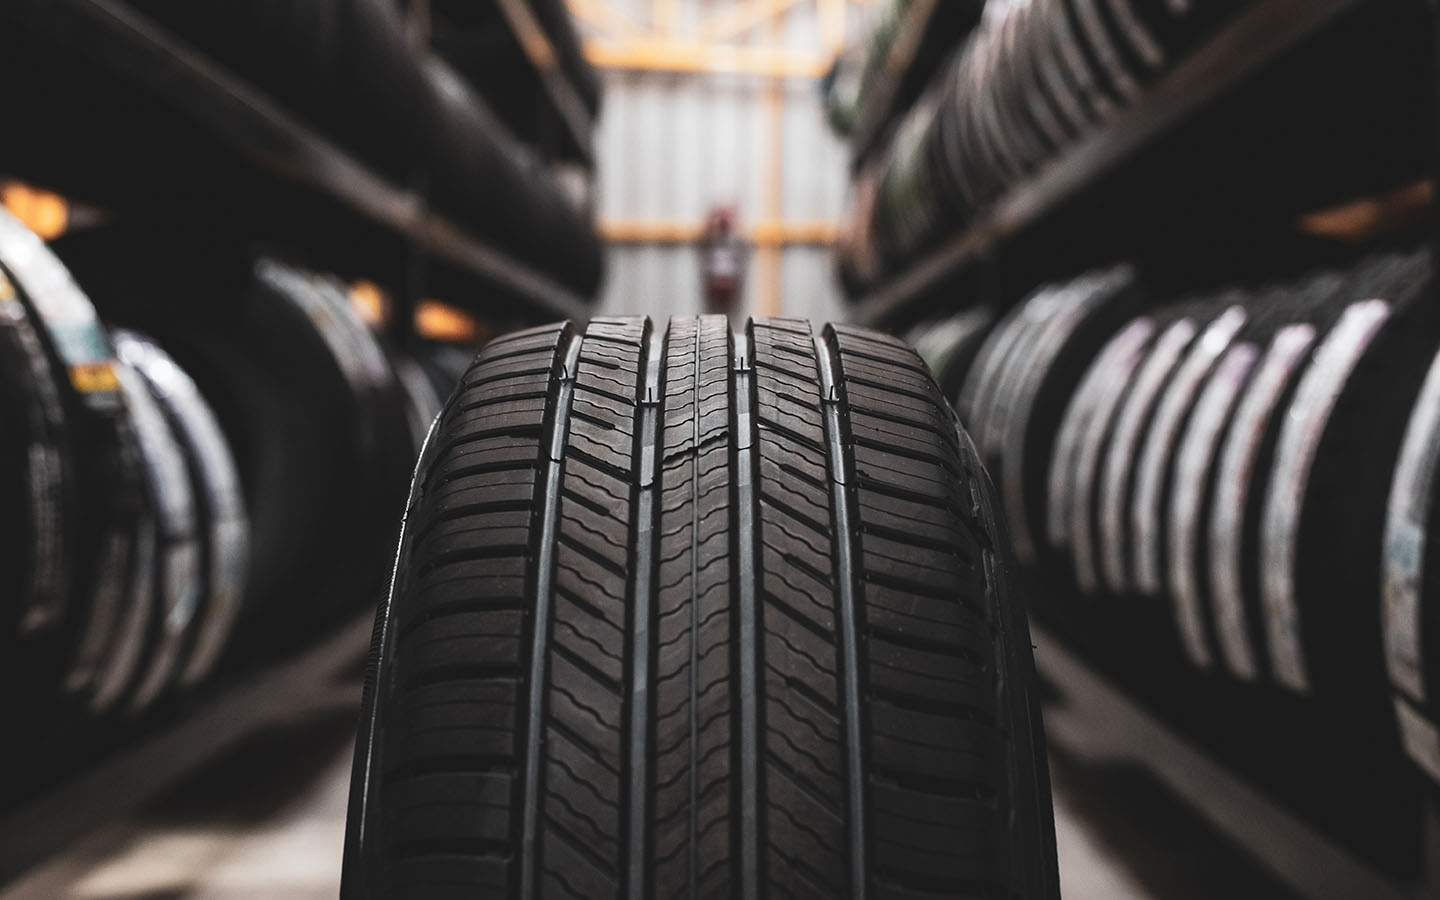 choose vehicle-specific tyres to enhance driving safety